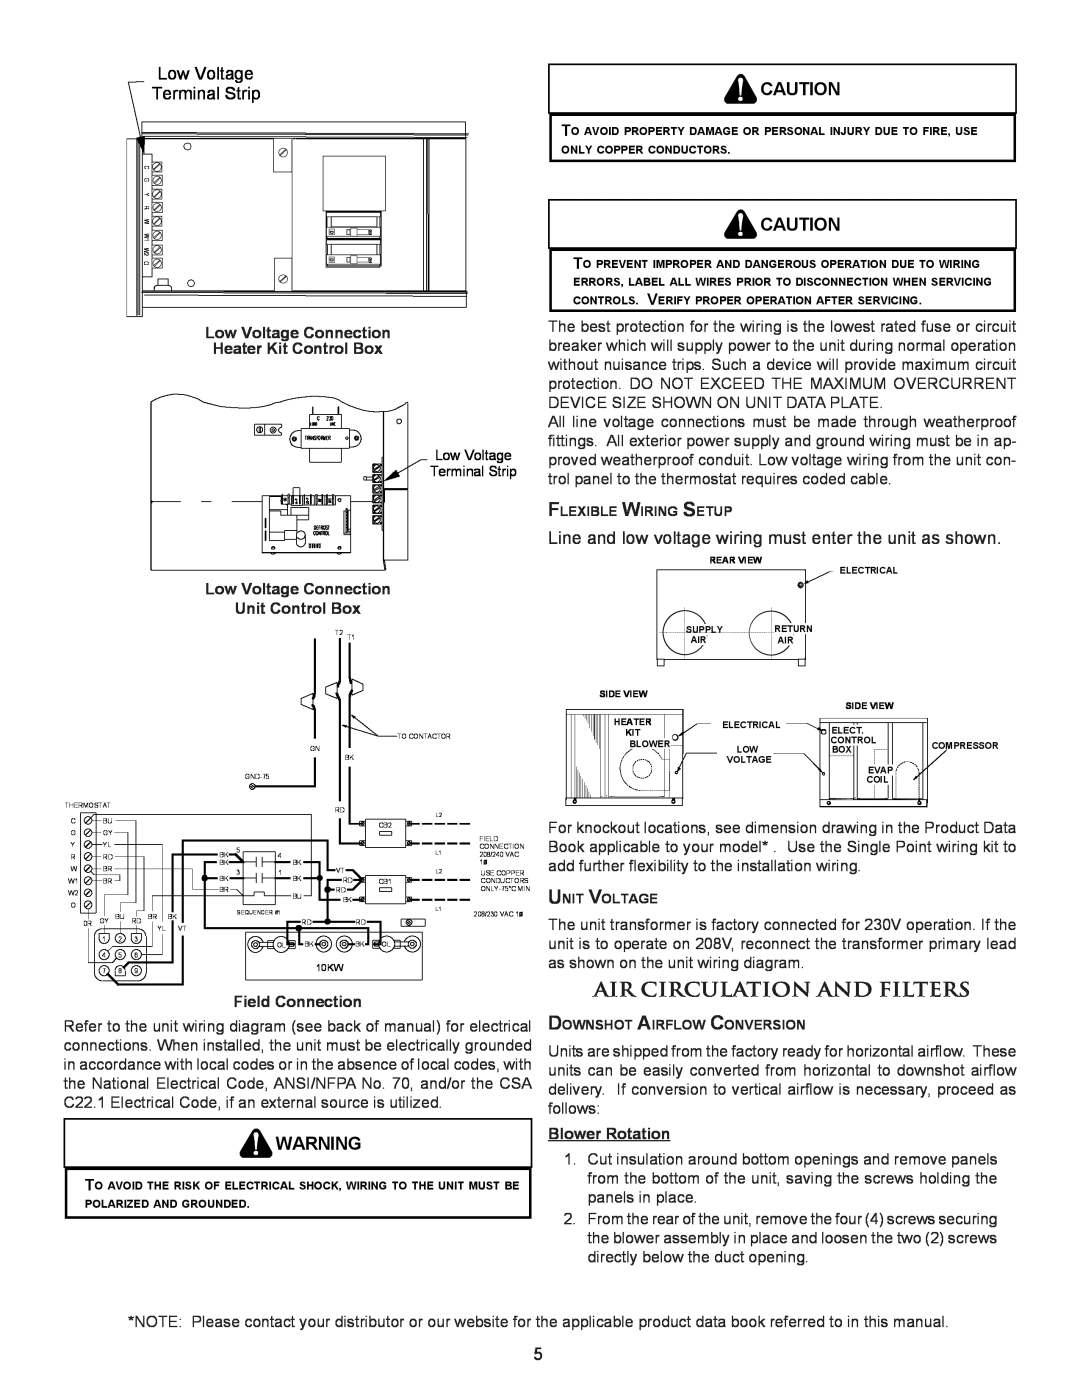 Amana PACKAGE HEAT PUMP installation instructions Air Circulation And Filters 